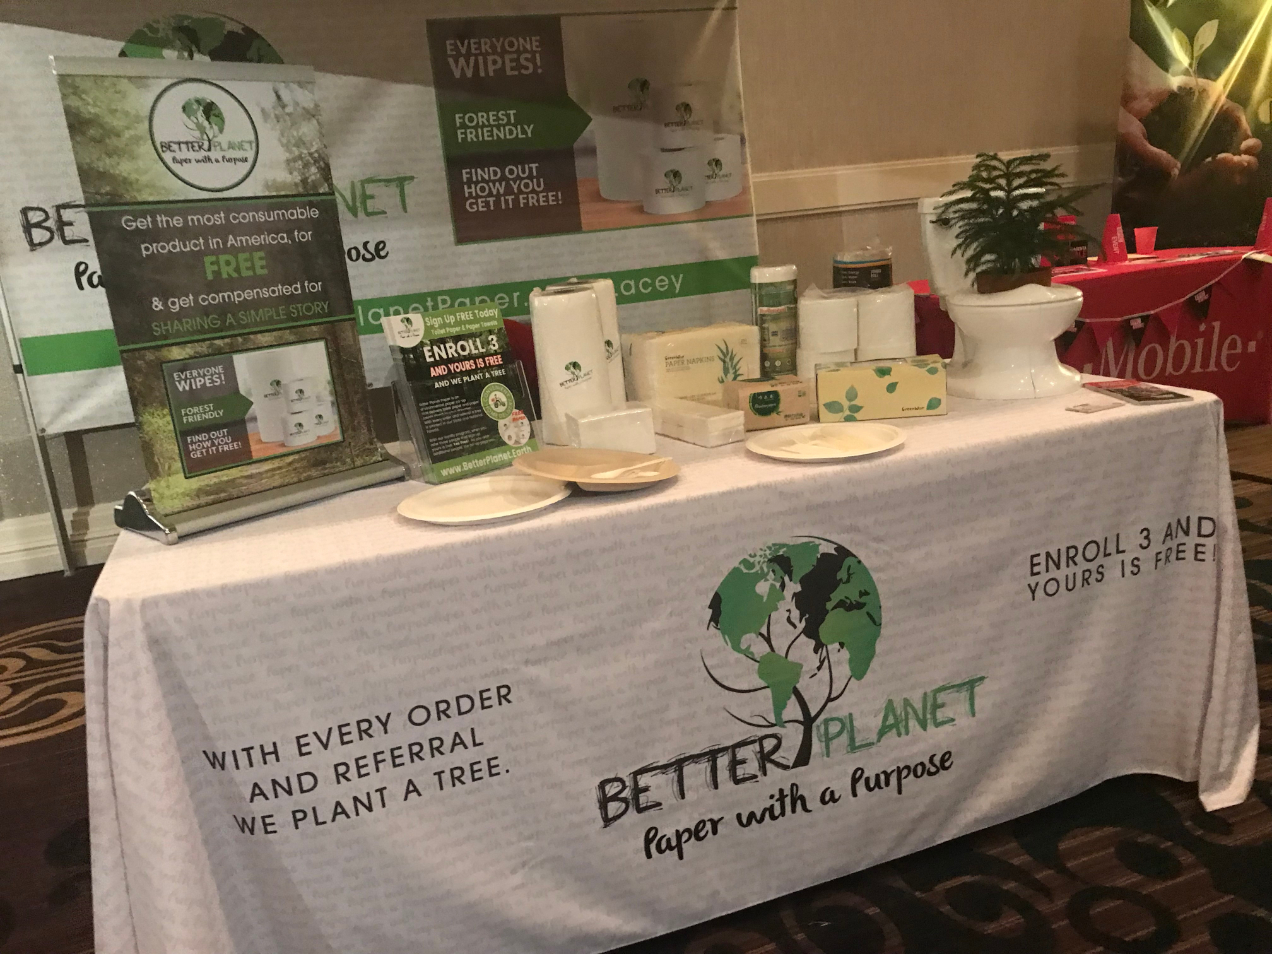 trade show display for better planet paper with a purpose